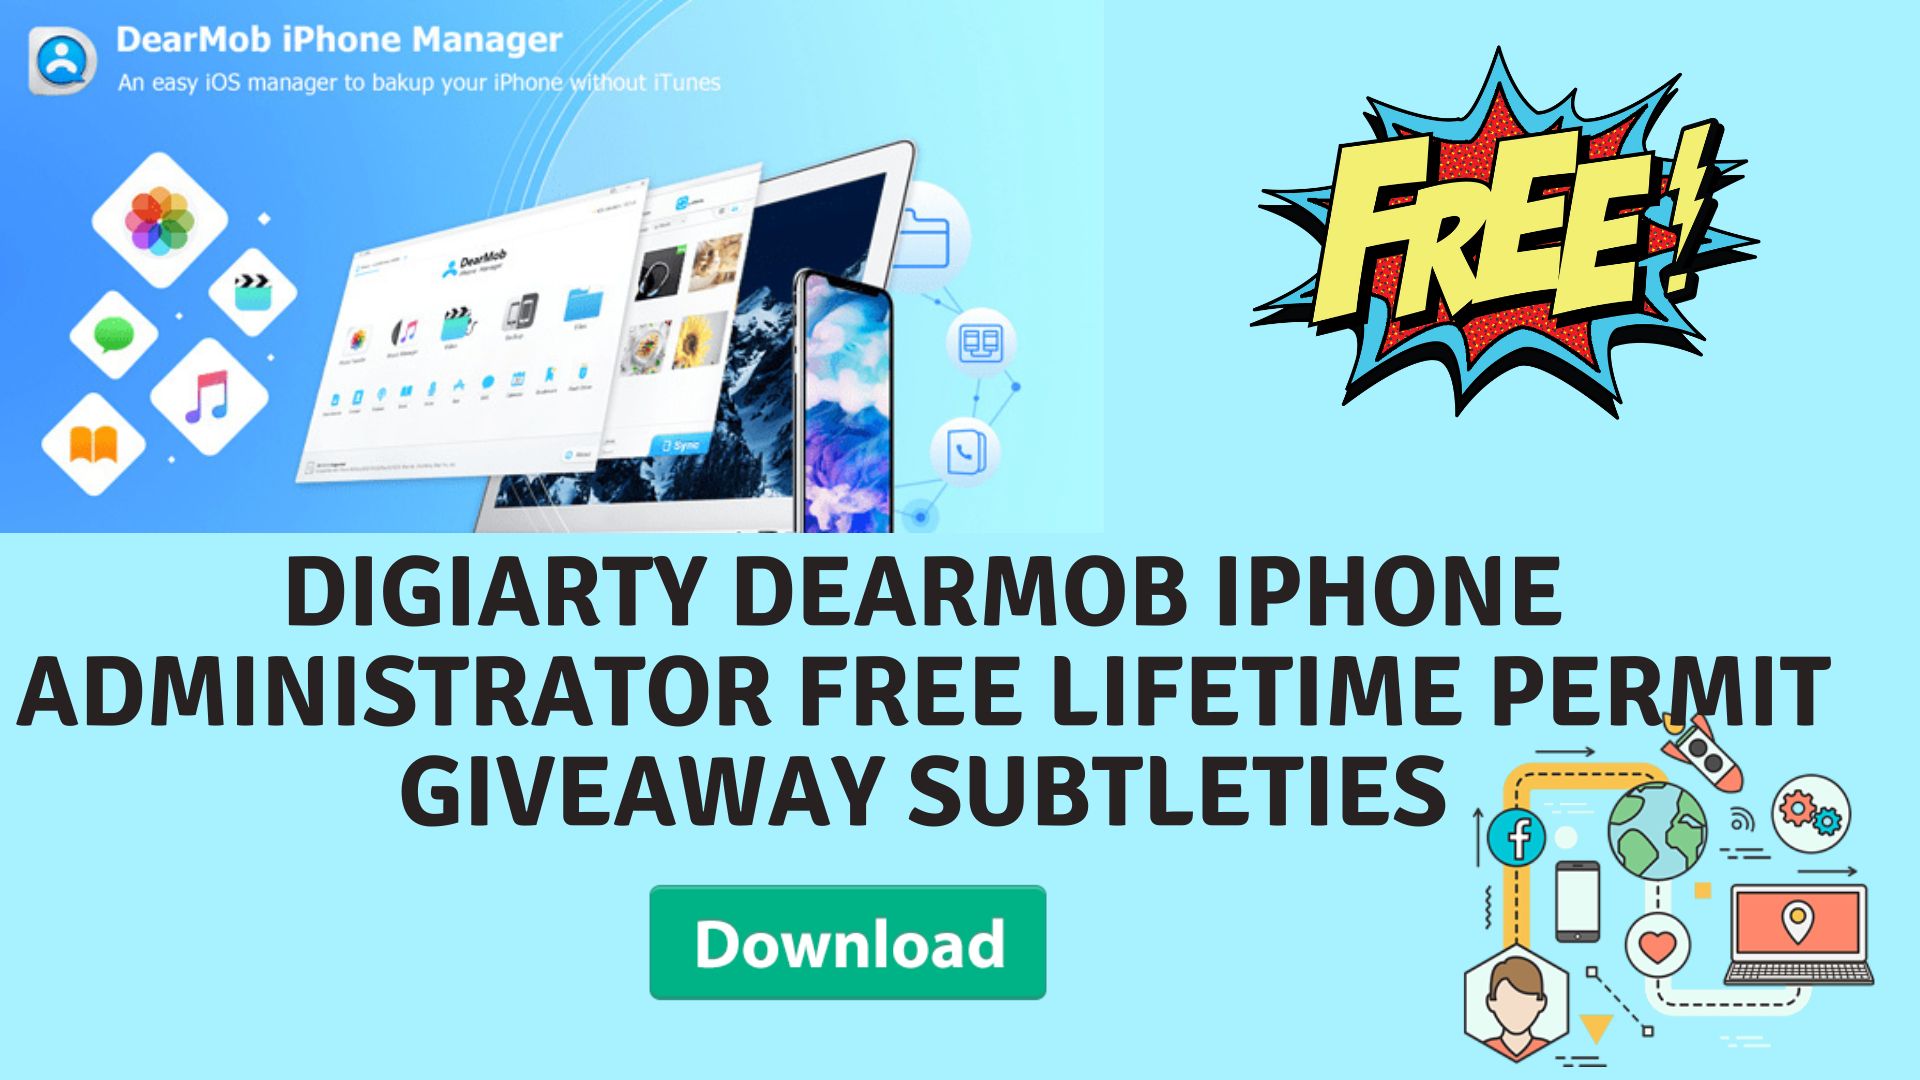 Digiarty dearmob iphone administrator free lifetime permit giveaway subtleties